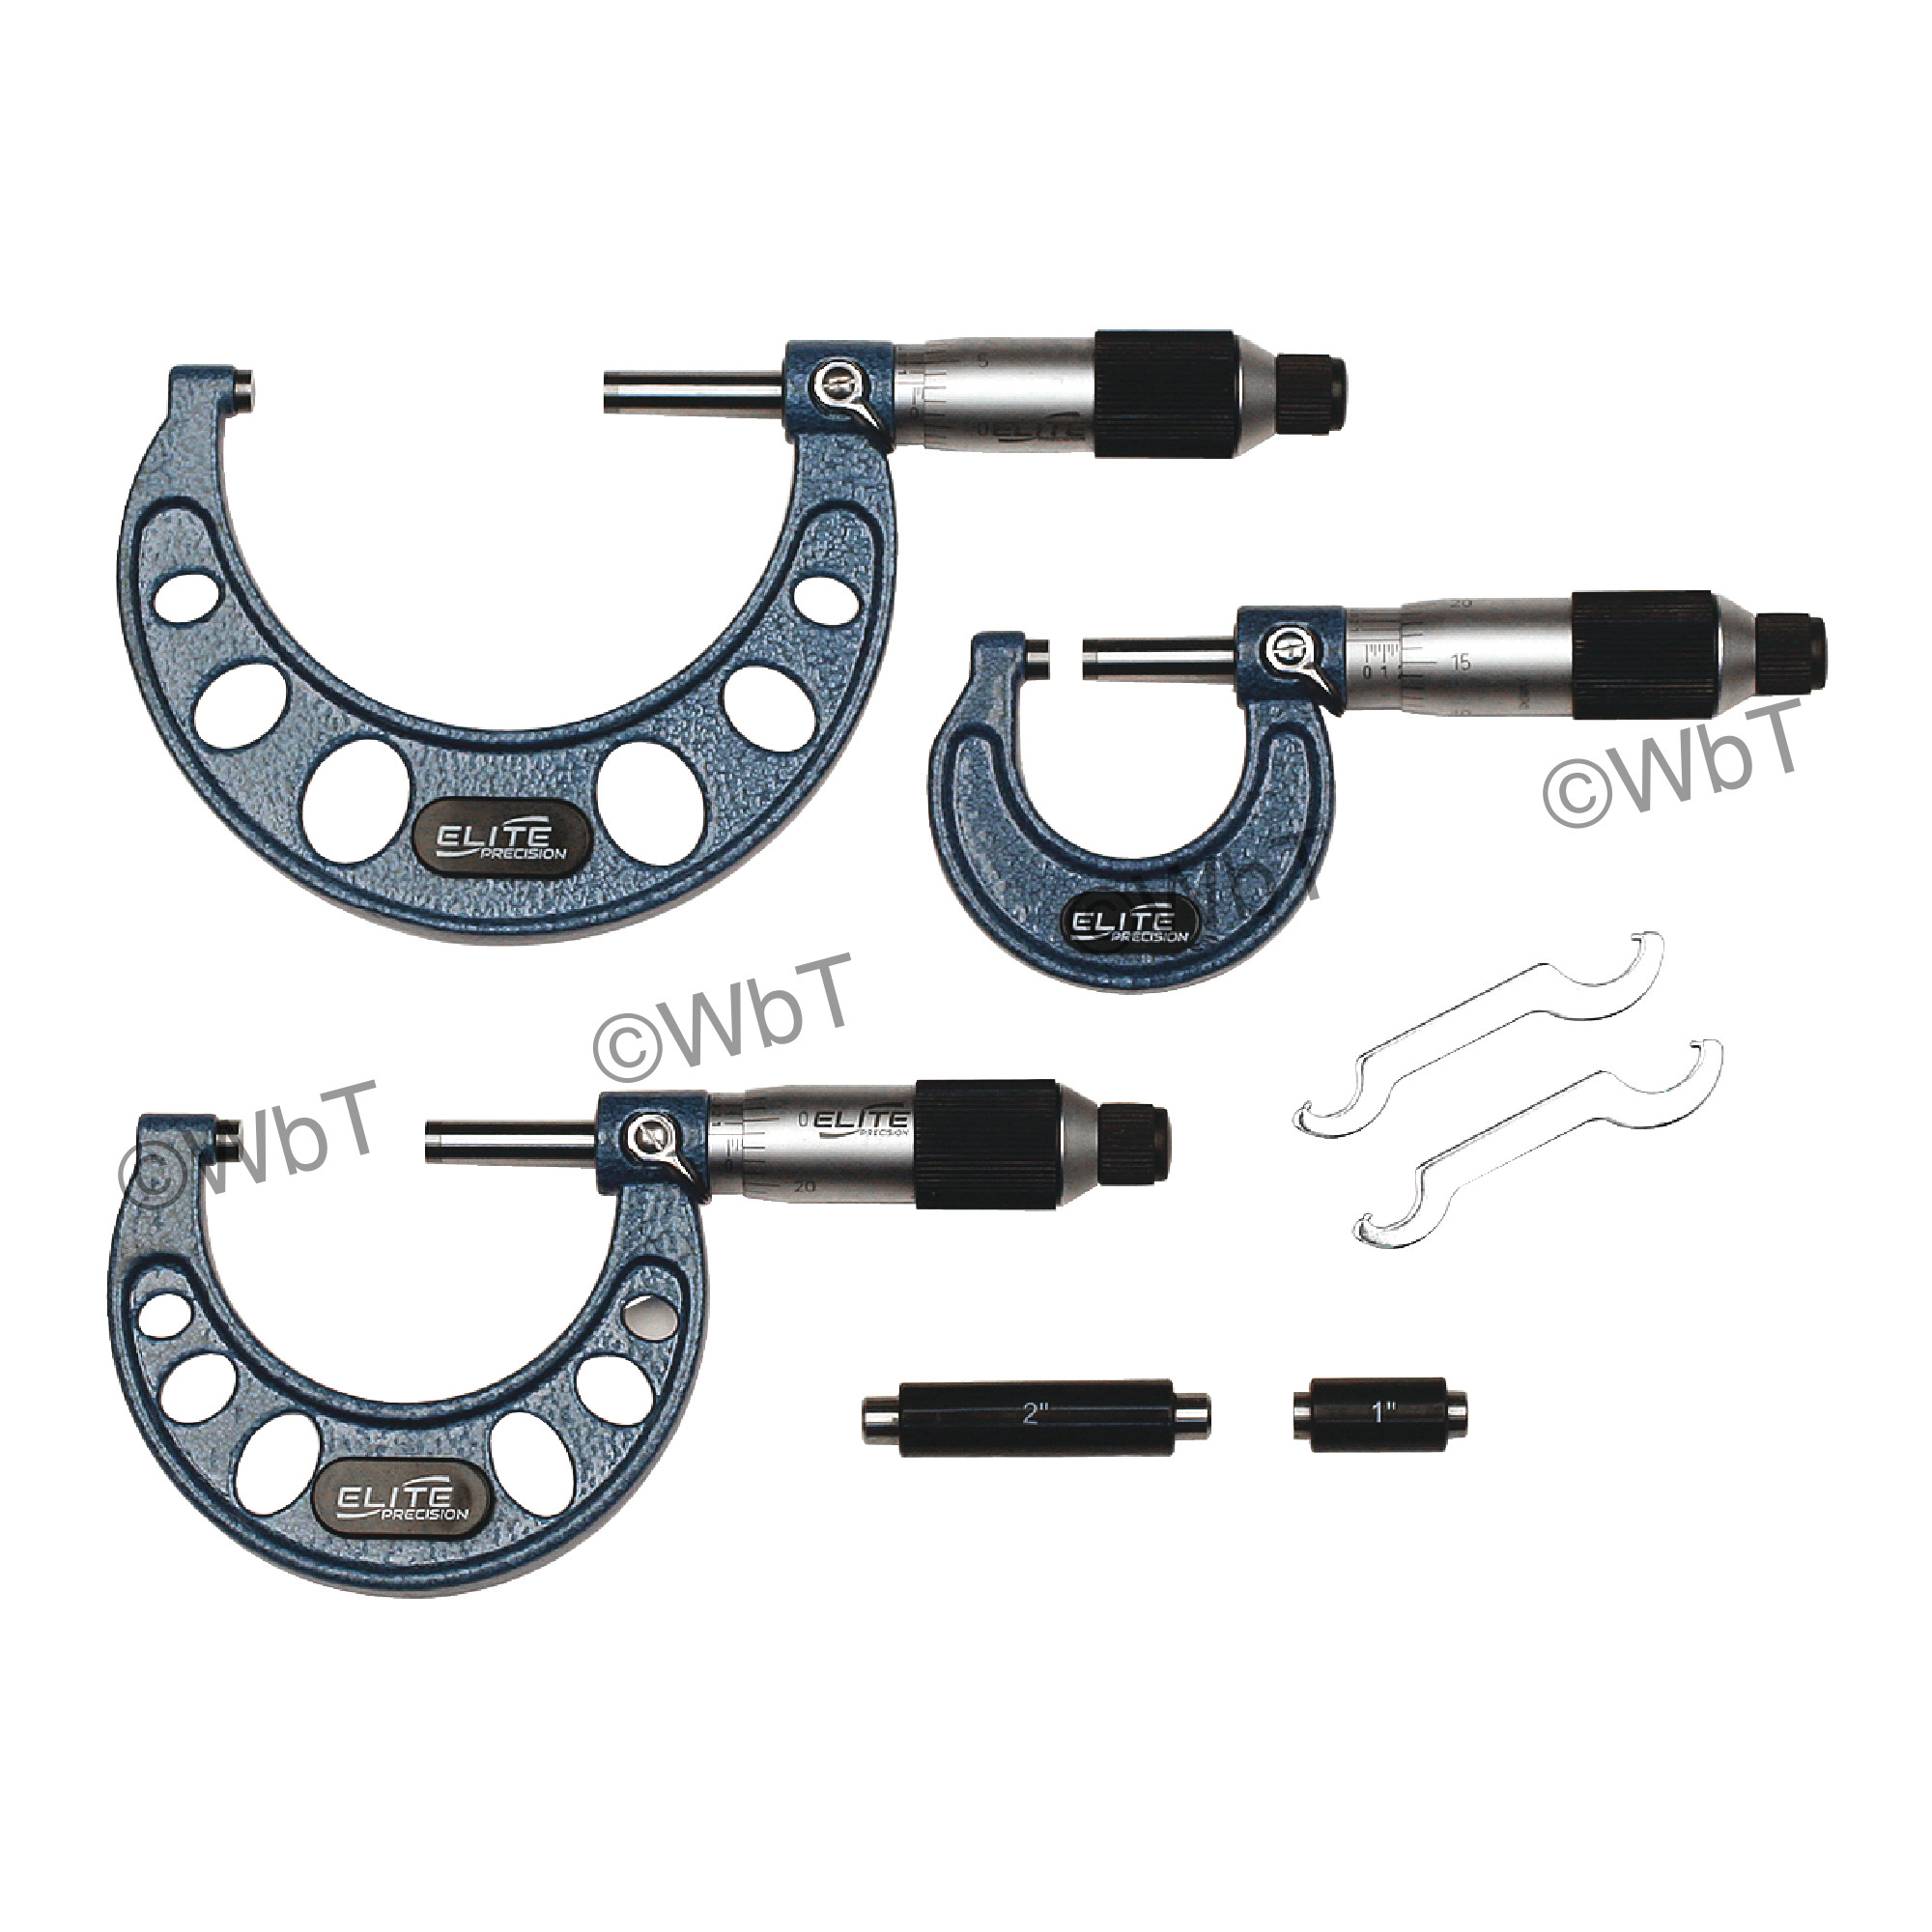 Certified Precision Outside Micrometer Set